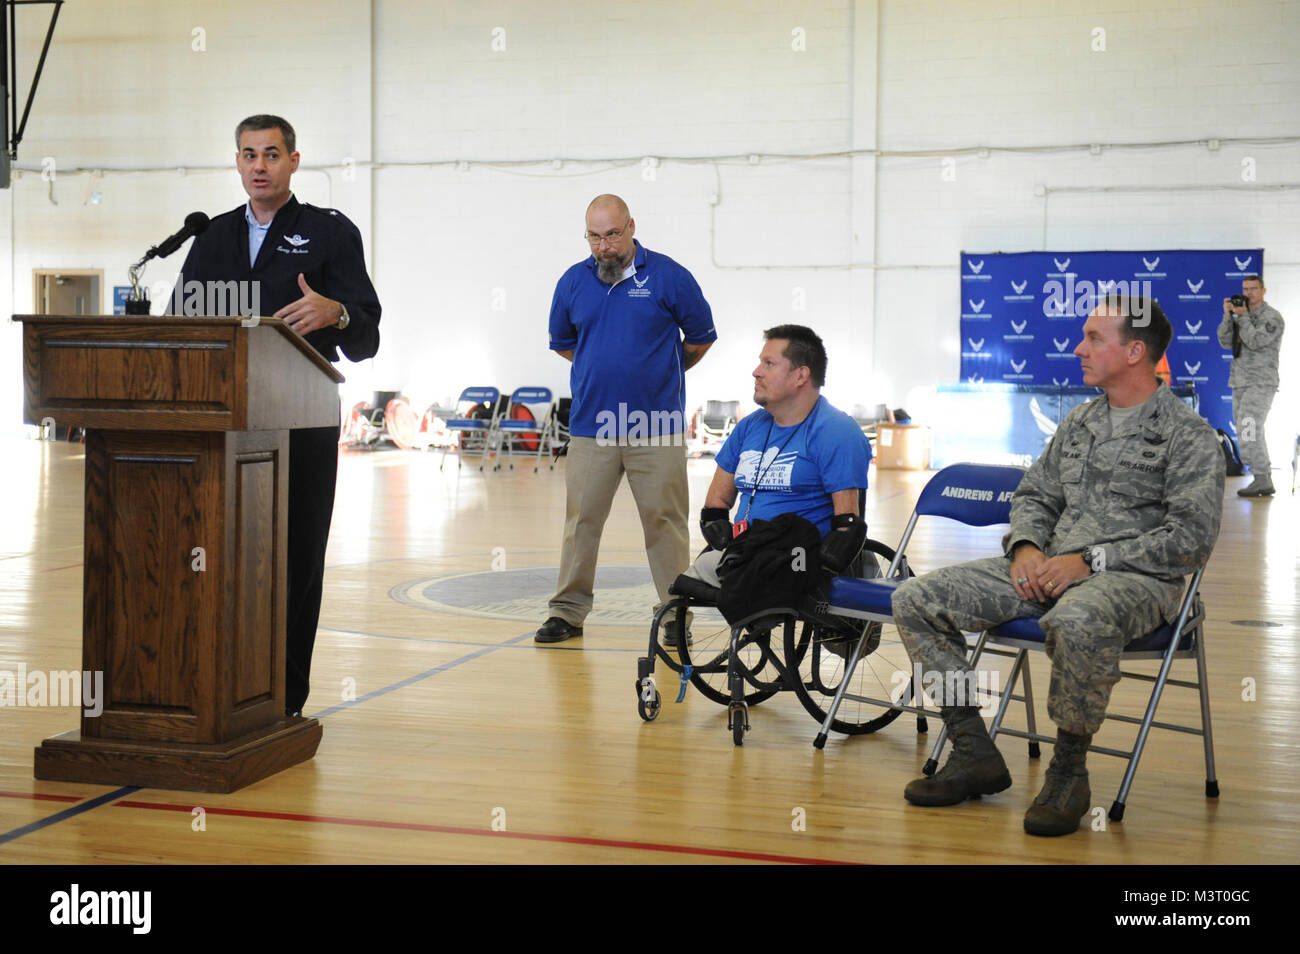 Air Force Brigadier General, Lenny Richoux, Director, Air Force Services, makes opening remarks as (L-R) Mr. Shawn Sprayberry, Communications and Outreach Coordinator, Mr. Bob Lujano, President, US Quad Rugby Association, and Air Force Col. Bradley Hoagland, 11th Wing and Joint Base Andrews Commander, listen in during the opening ceremony of the Joint Services Wheelchair Rugby Exhibition/Warrior Care Month 2015 at Joint Base Andrews, Maryland.  (Department of Defense photo by Marvin Lynchard) 151116-D-FW736-003 by DoD News Photos Stock Photo